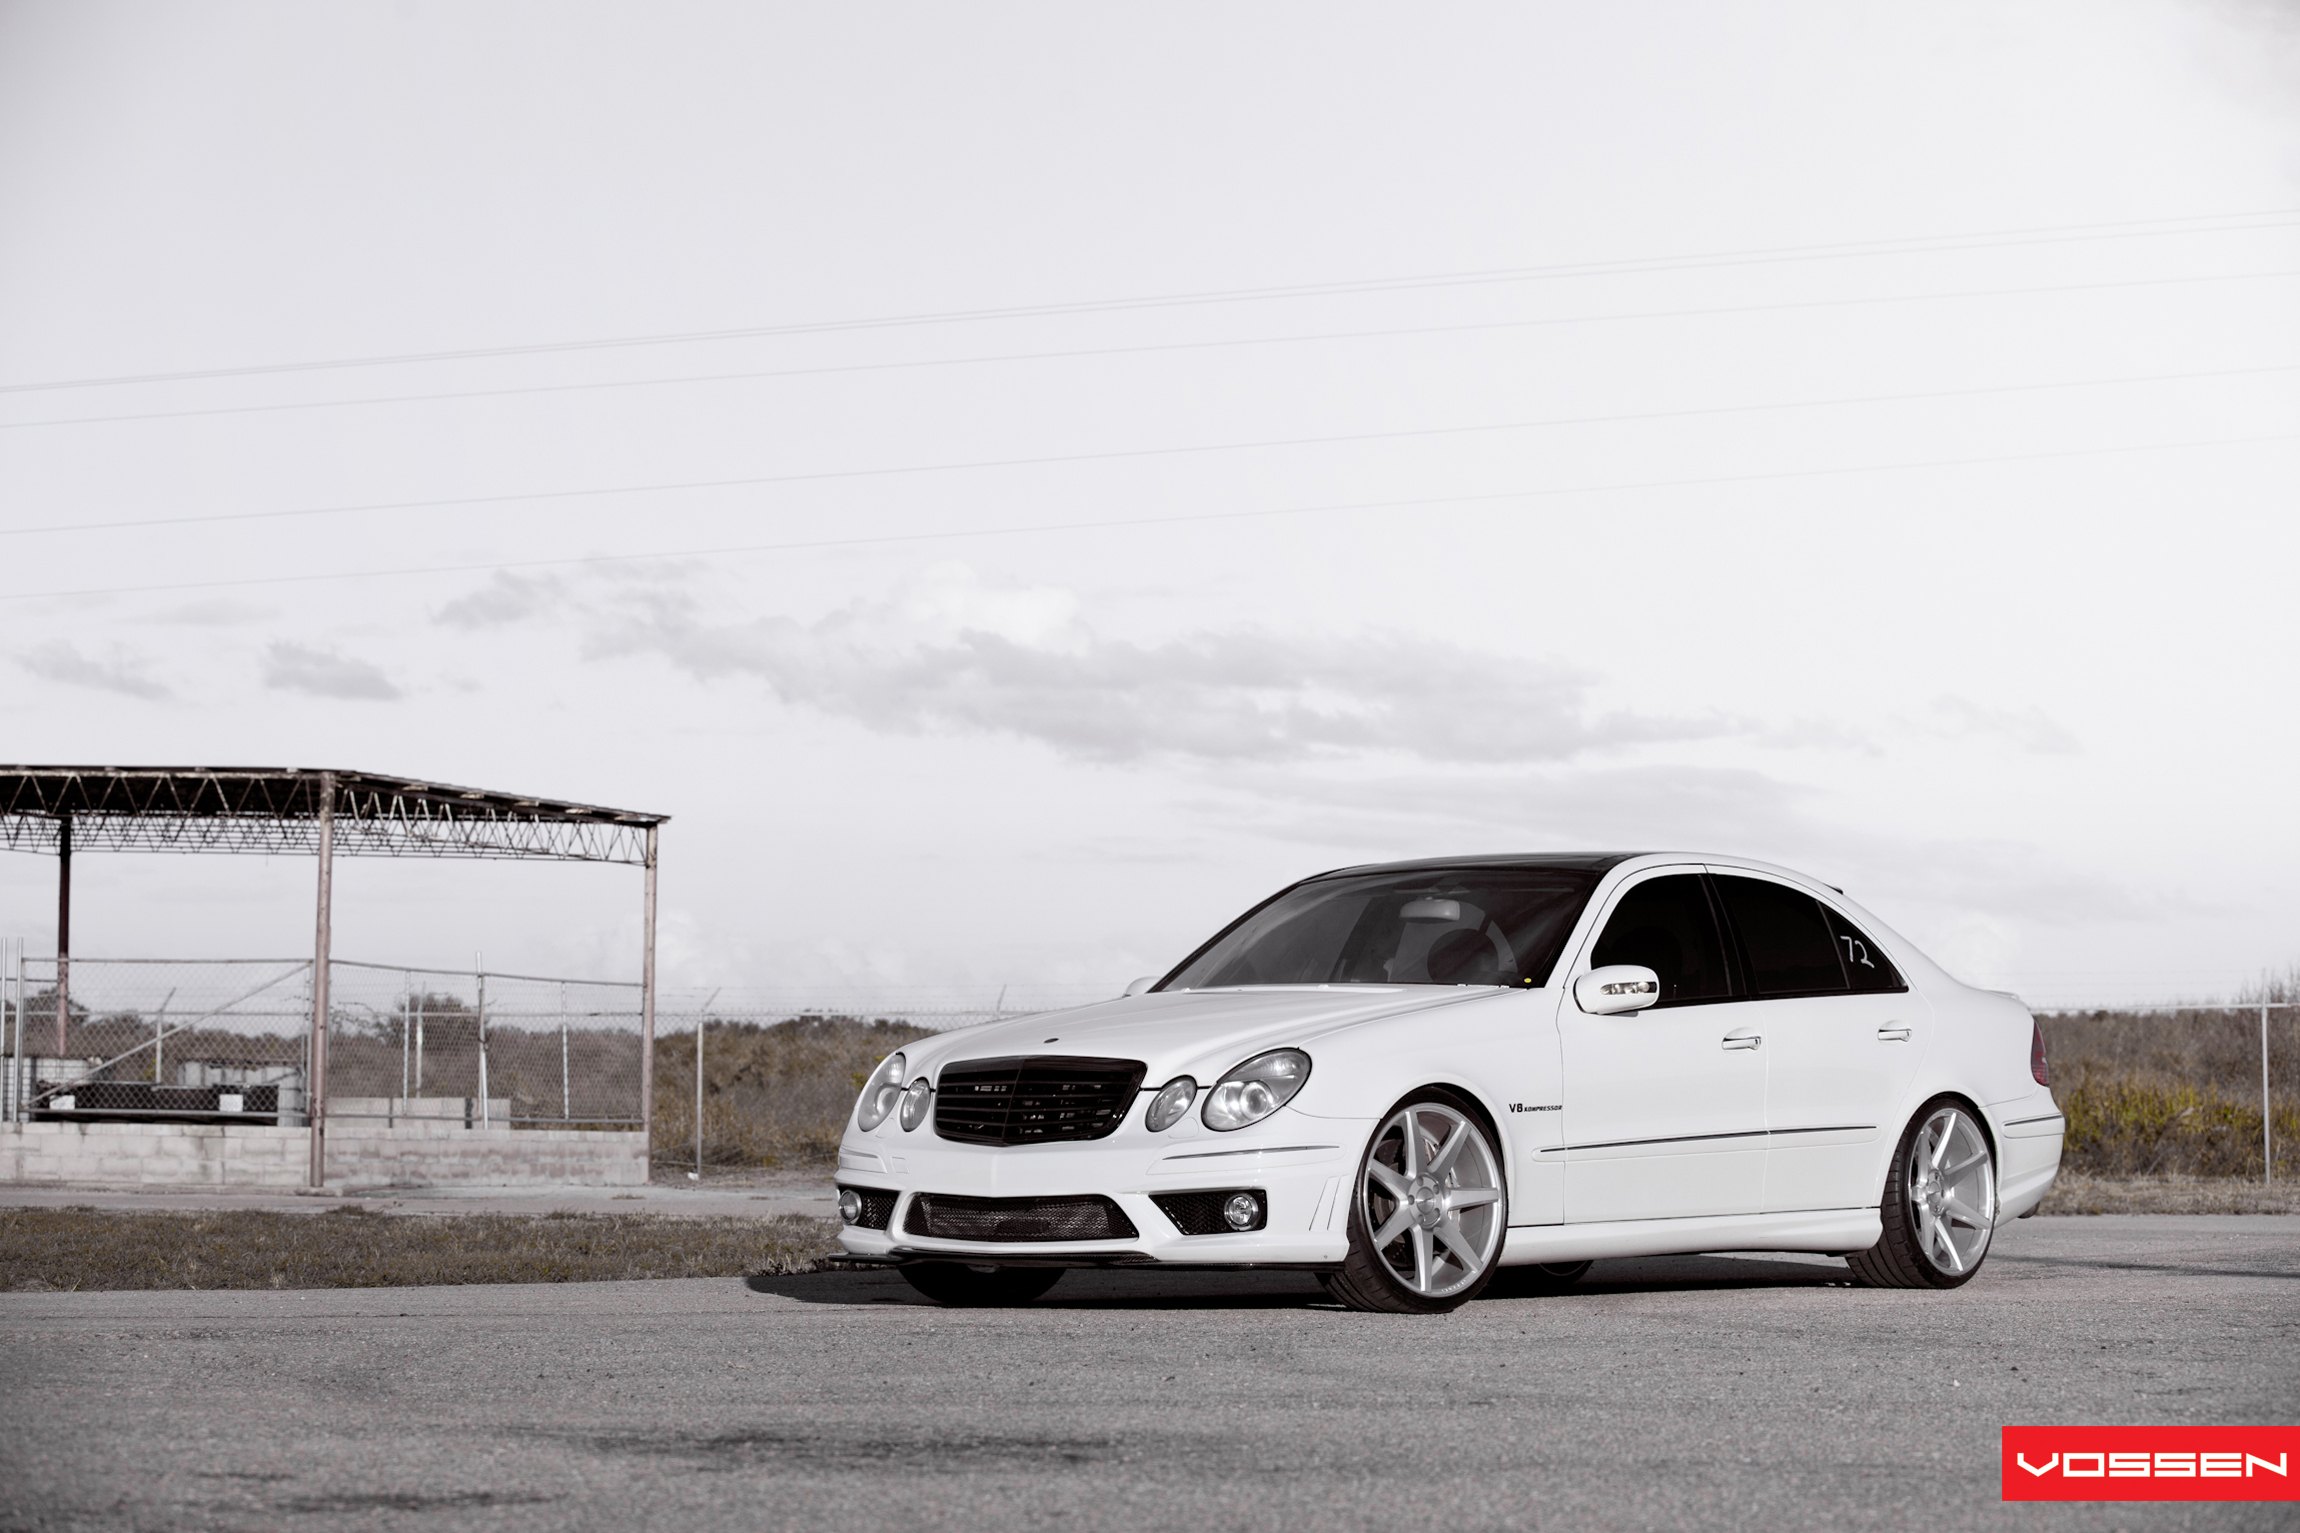 Blacked Out Custom Grille on White Mercedes E Class - Photo by Vossen